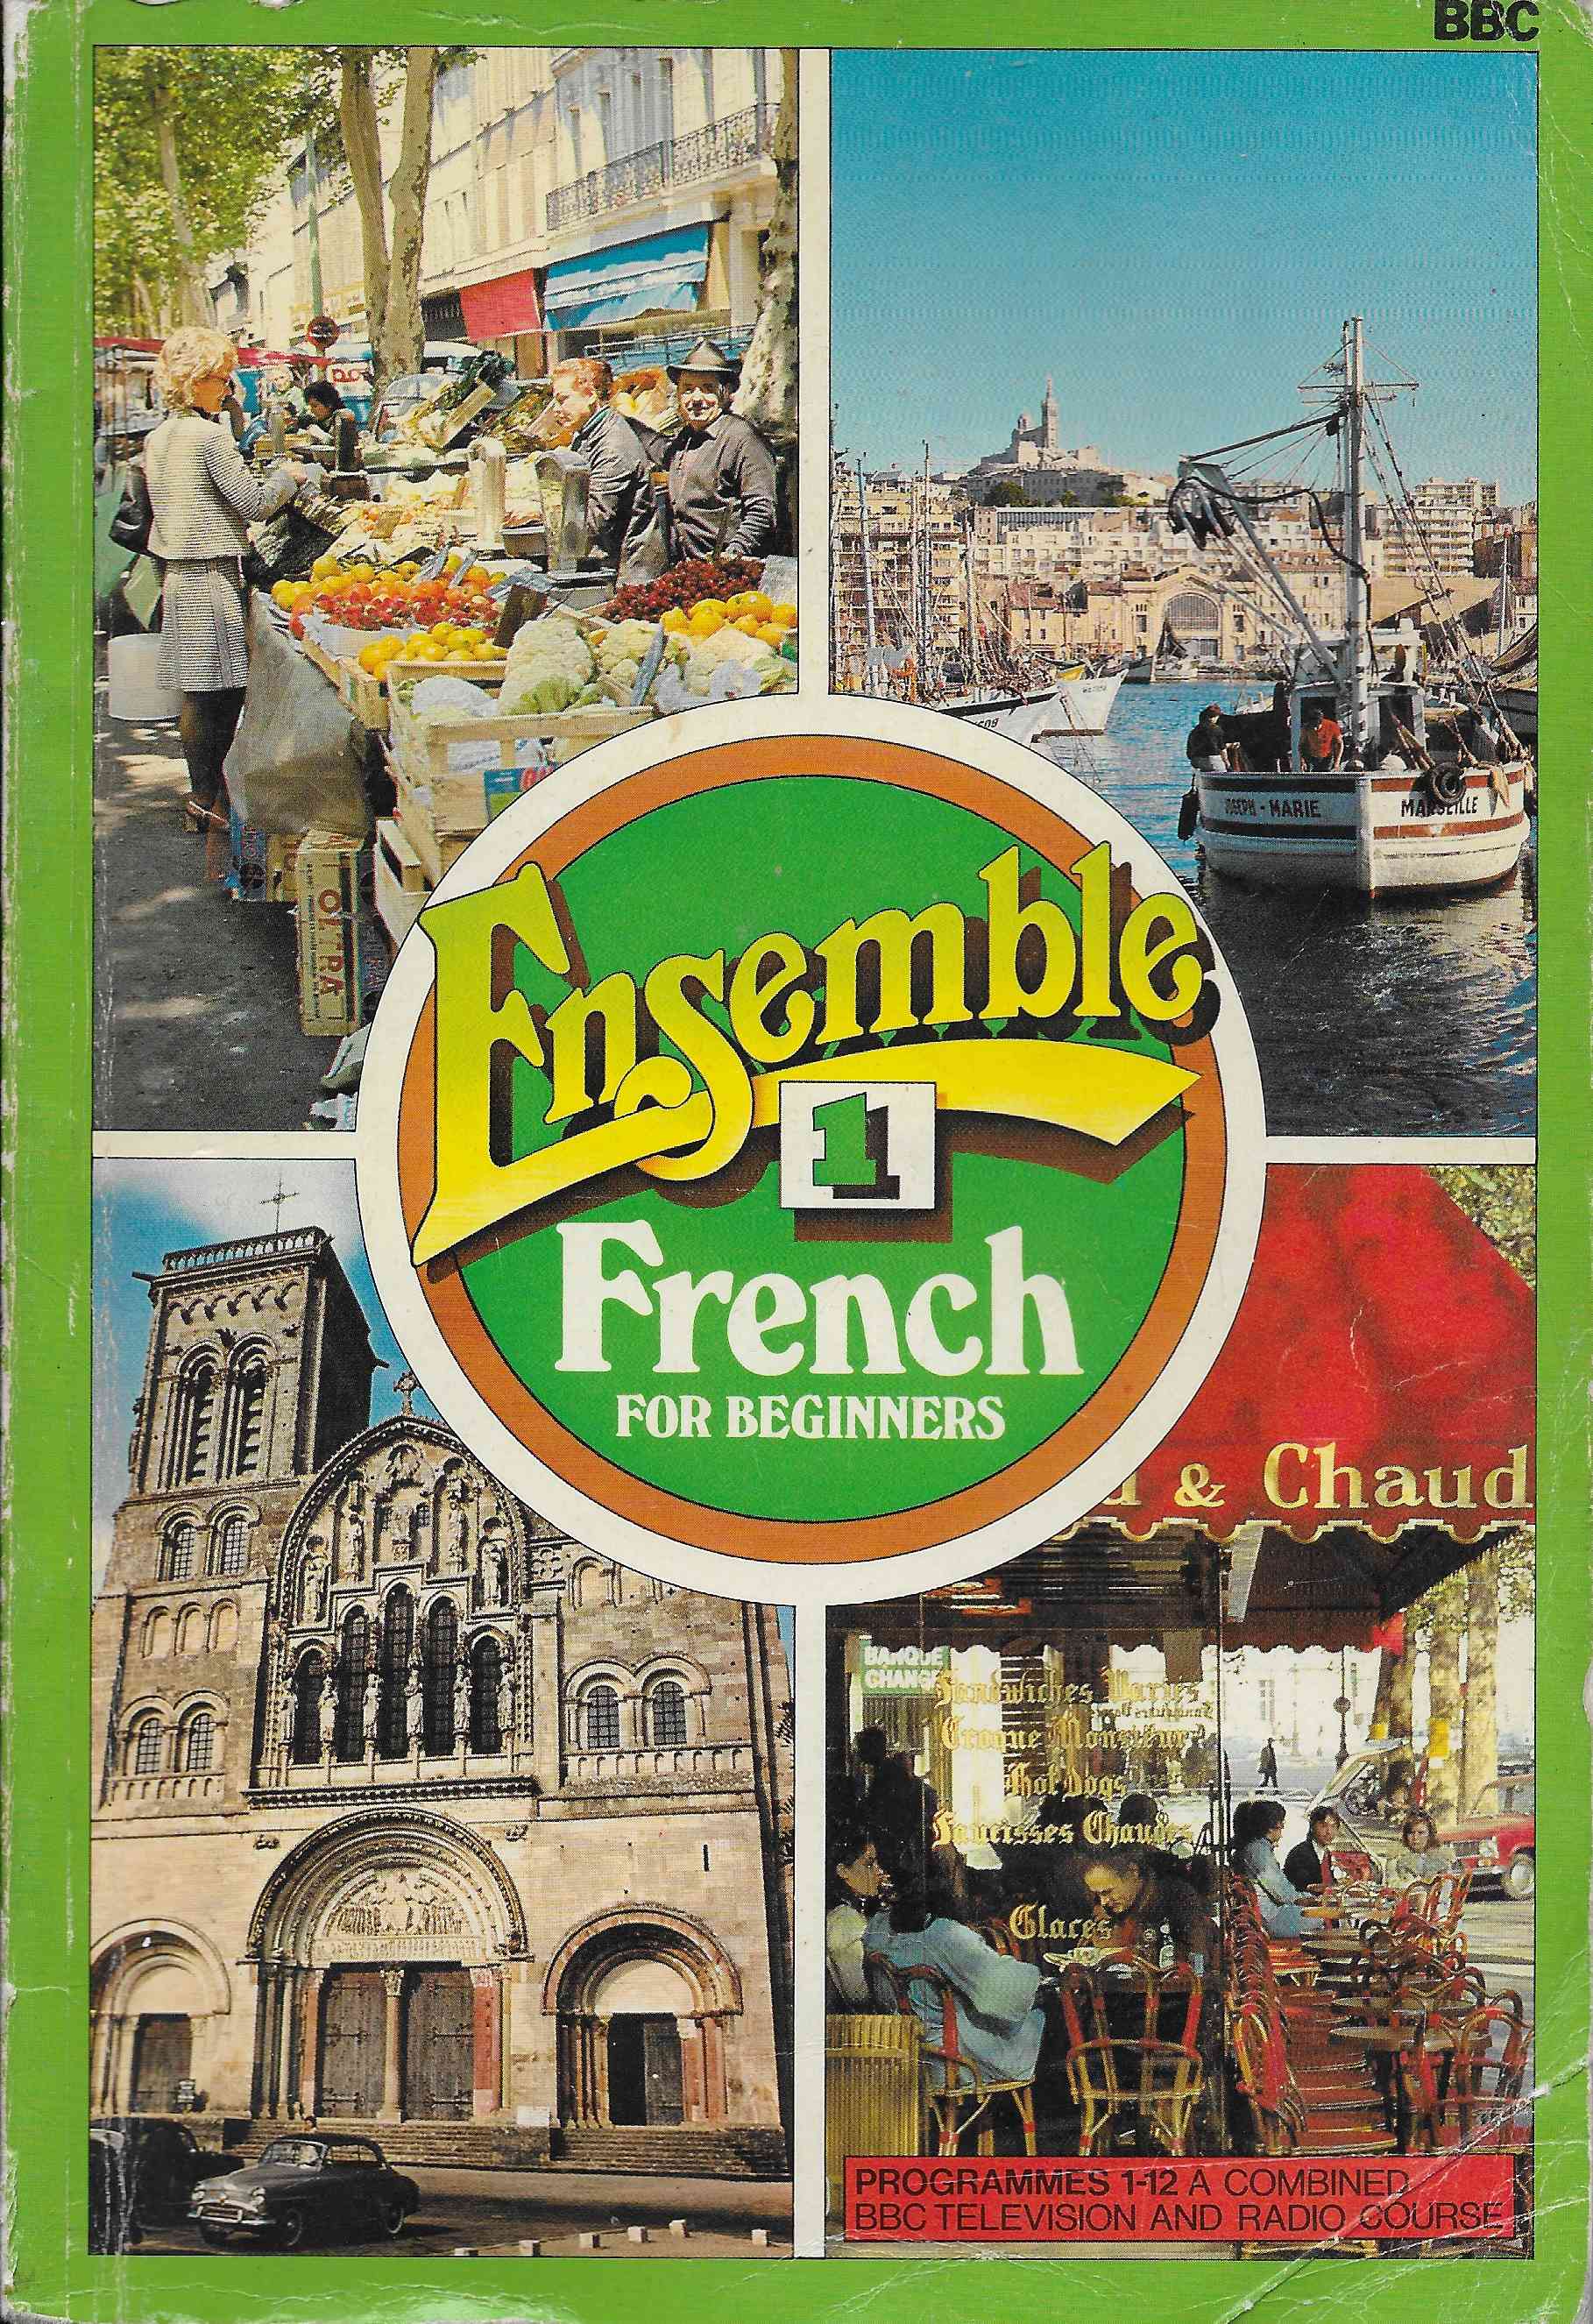 Picture of ISBN 0 563 10959 9 Ensemble 1 - French for beginners - Programmes 1 - 12 by artist Various from the BBC books - Records and Tapes library